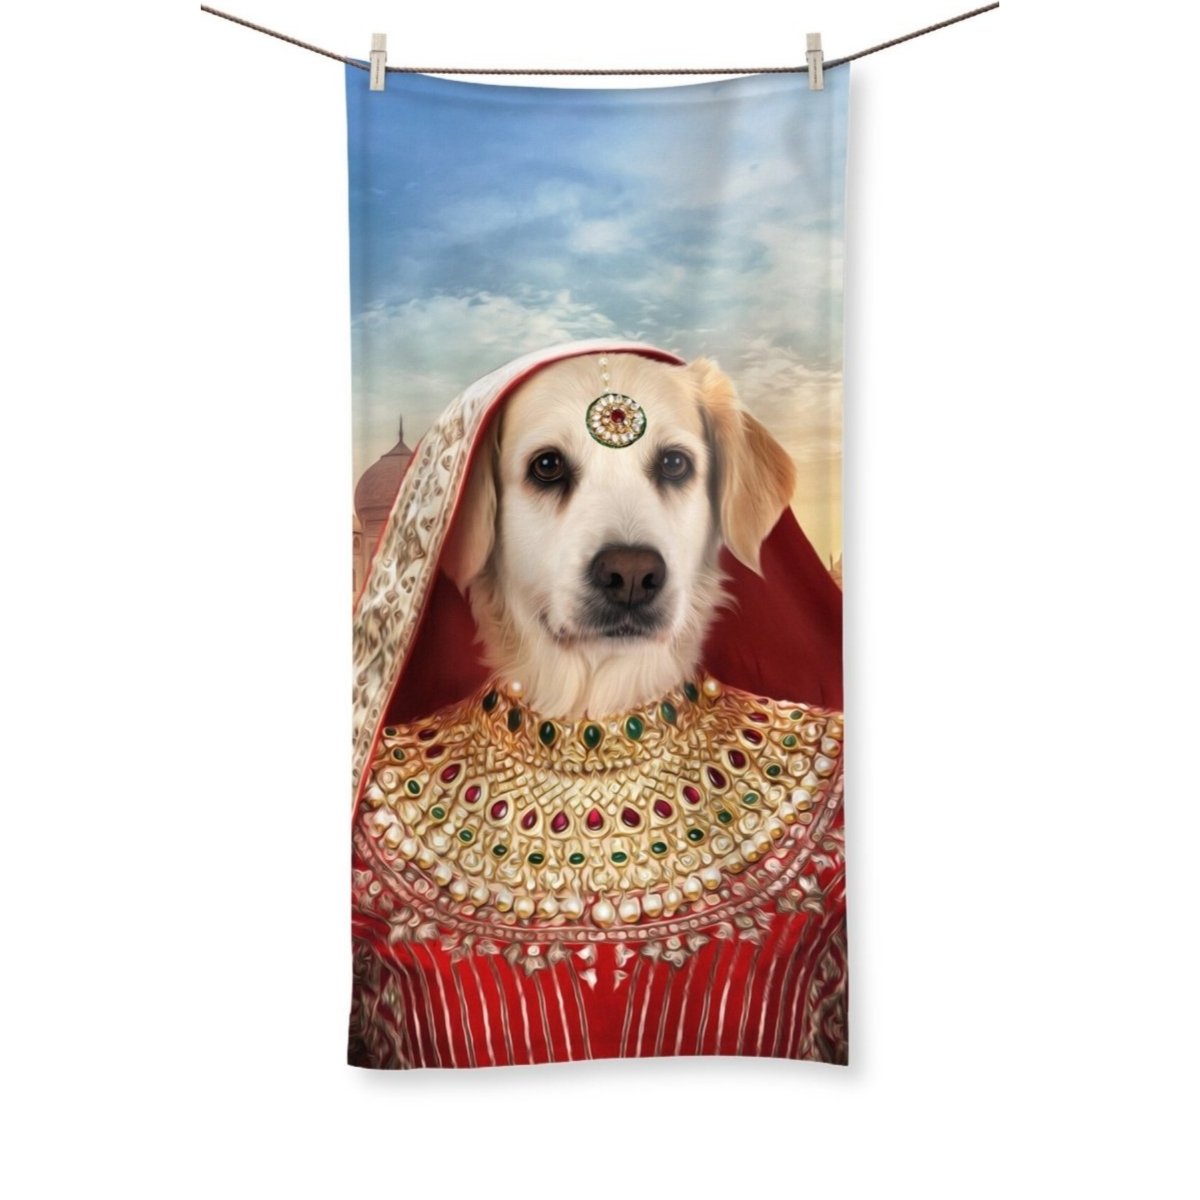 The Indian Rani: Custom Pet Towel - Paw & Glory - #pet portraits# - #dog portraits# - #pet portraits uk#Paw & Glory, paw and glory, dog drawing from photo, dog portrait images, dog portraits admiral, aristocrat dog painting, cat picture painting, dog astronaut photo, pet portraits,pet portraits Towel